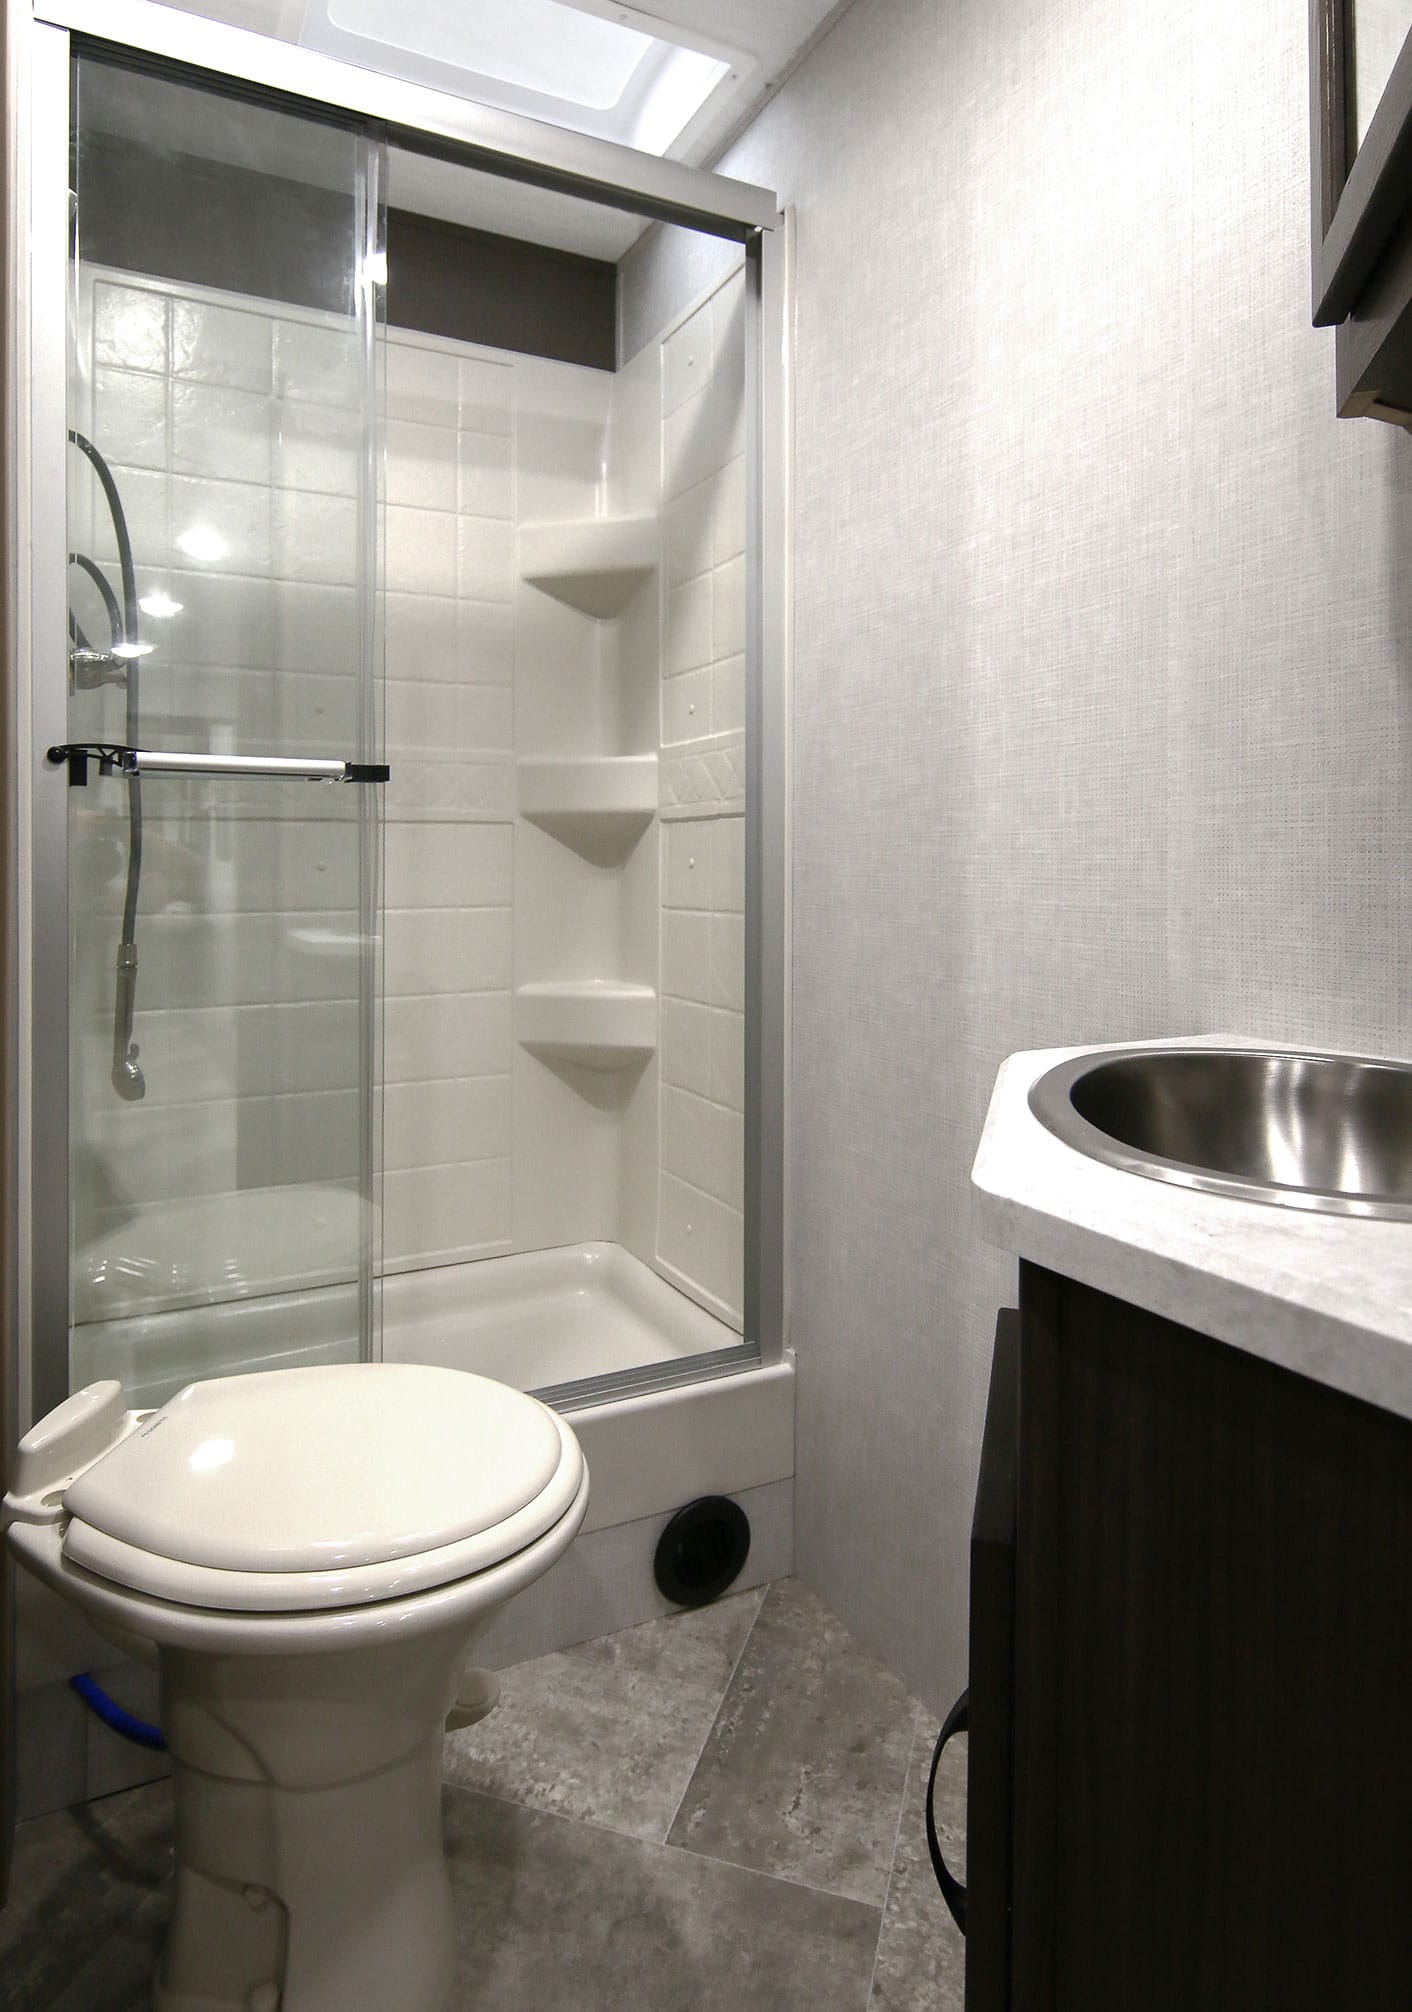 White toilet and glass-enclosed shower in trailer bathroom.